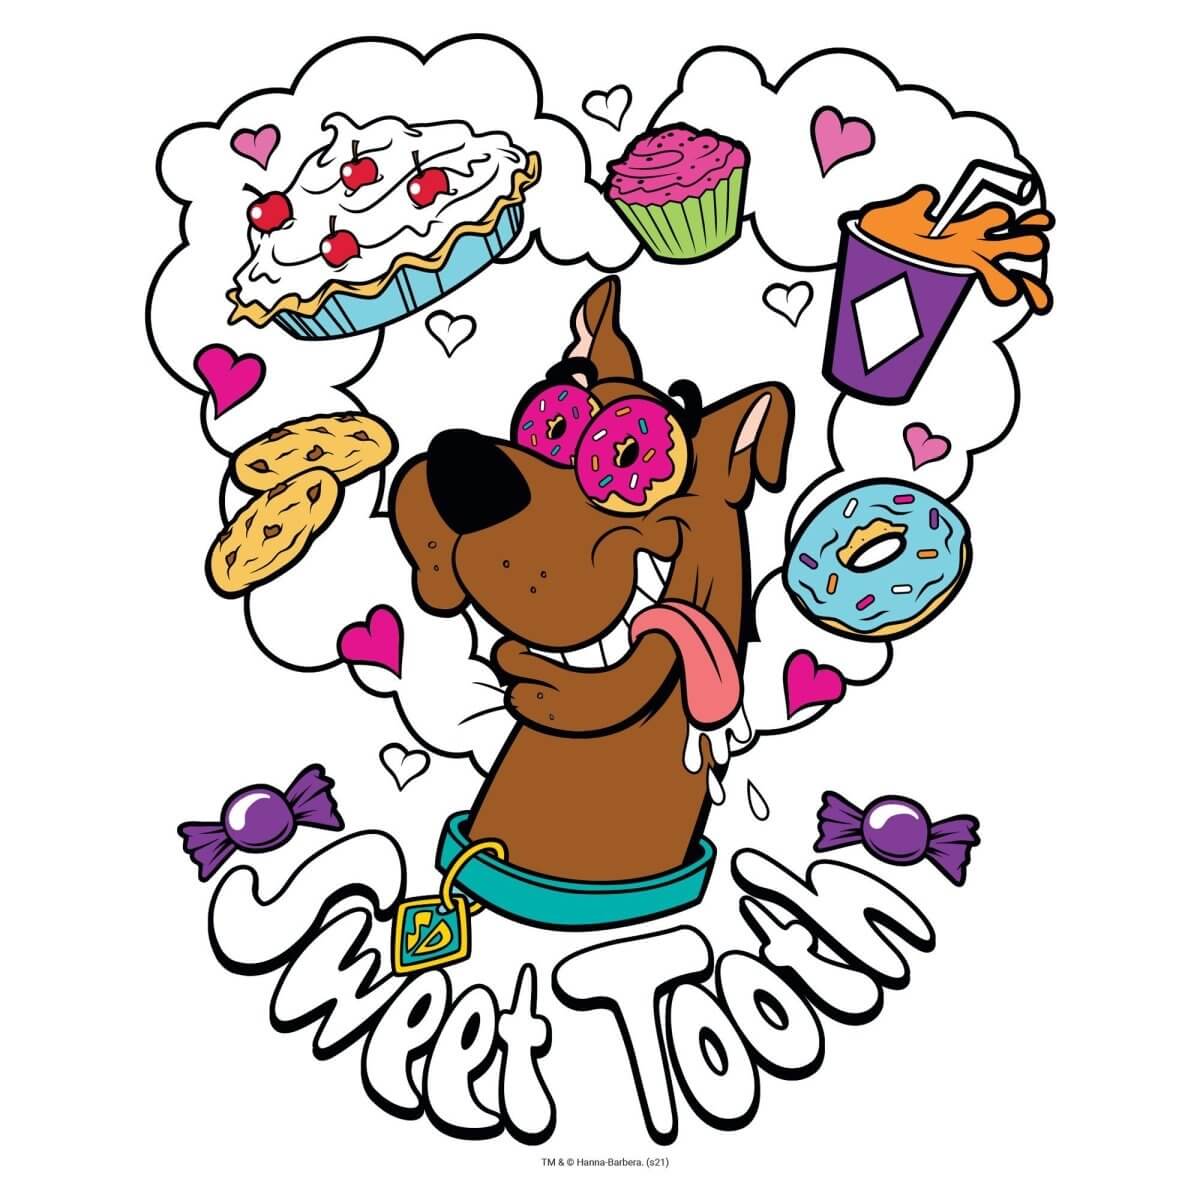 Kismet Decals Home & Room Decor Scooby-Doo Sweet Tooth Wall decal sticker - officially licensed - latex printed with no solvent odor - Kismet Decals